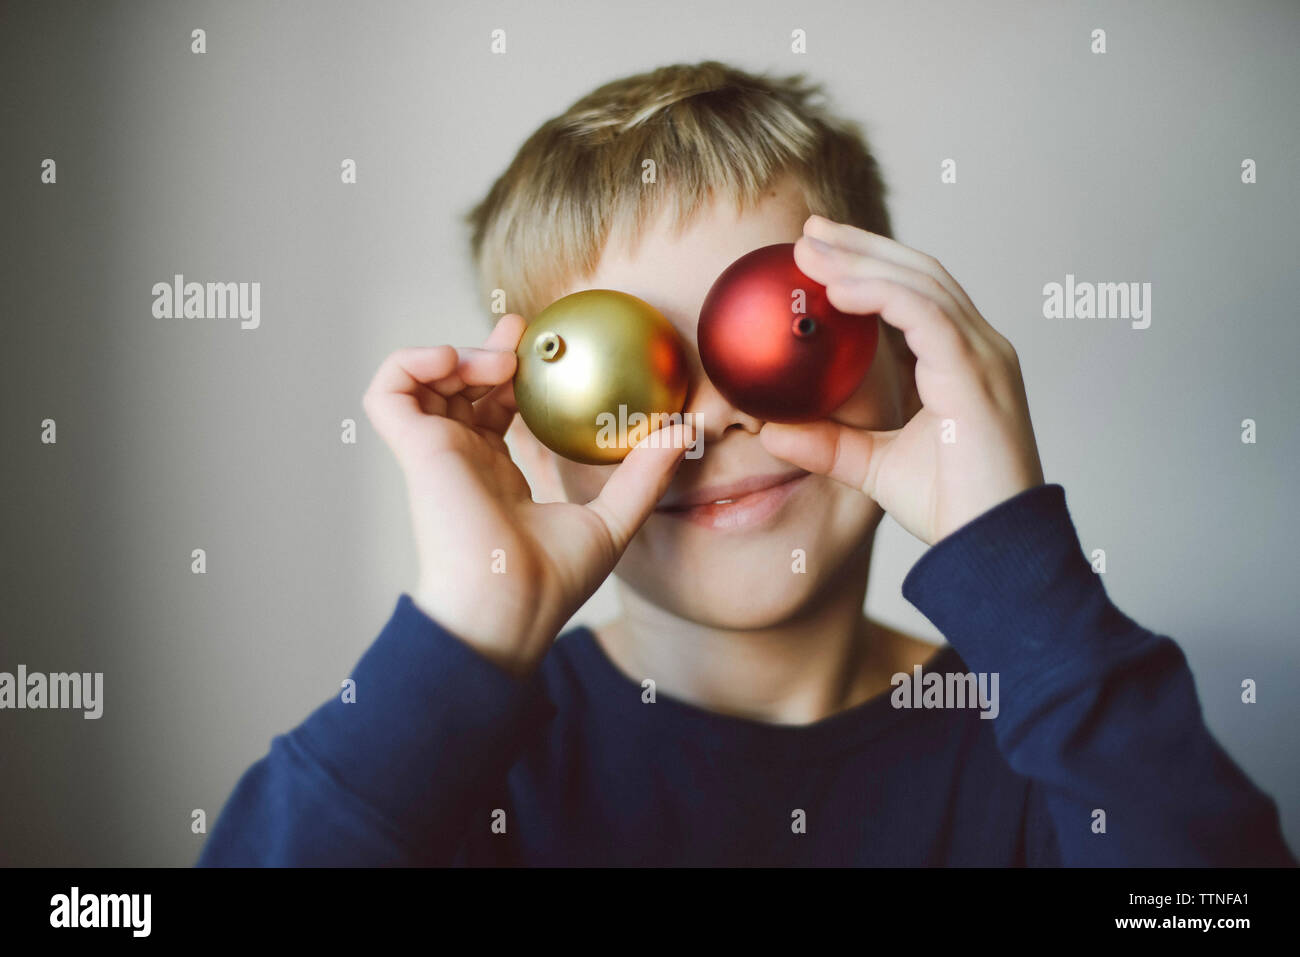 Playful boy holding baubles against face at home Stock Photo